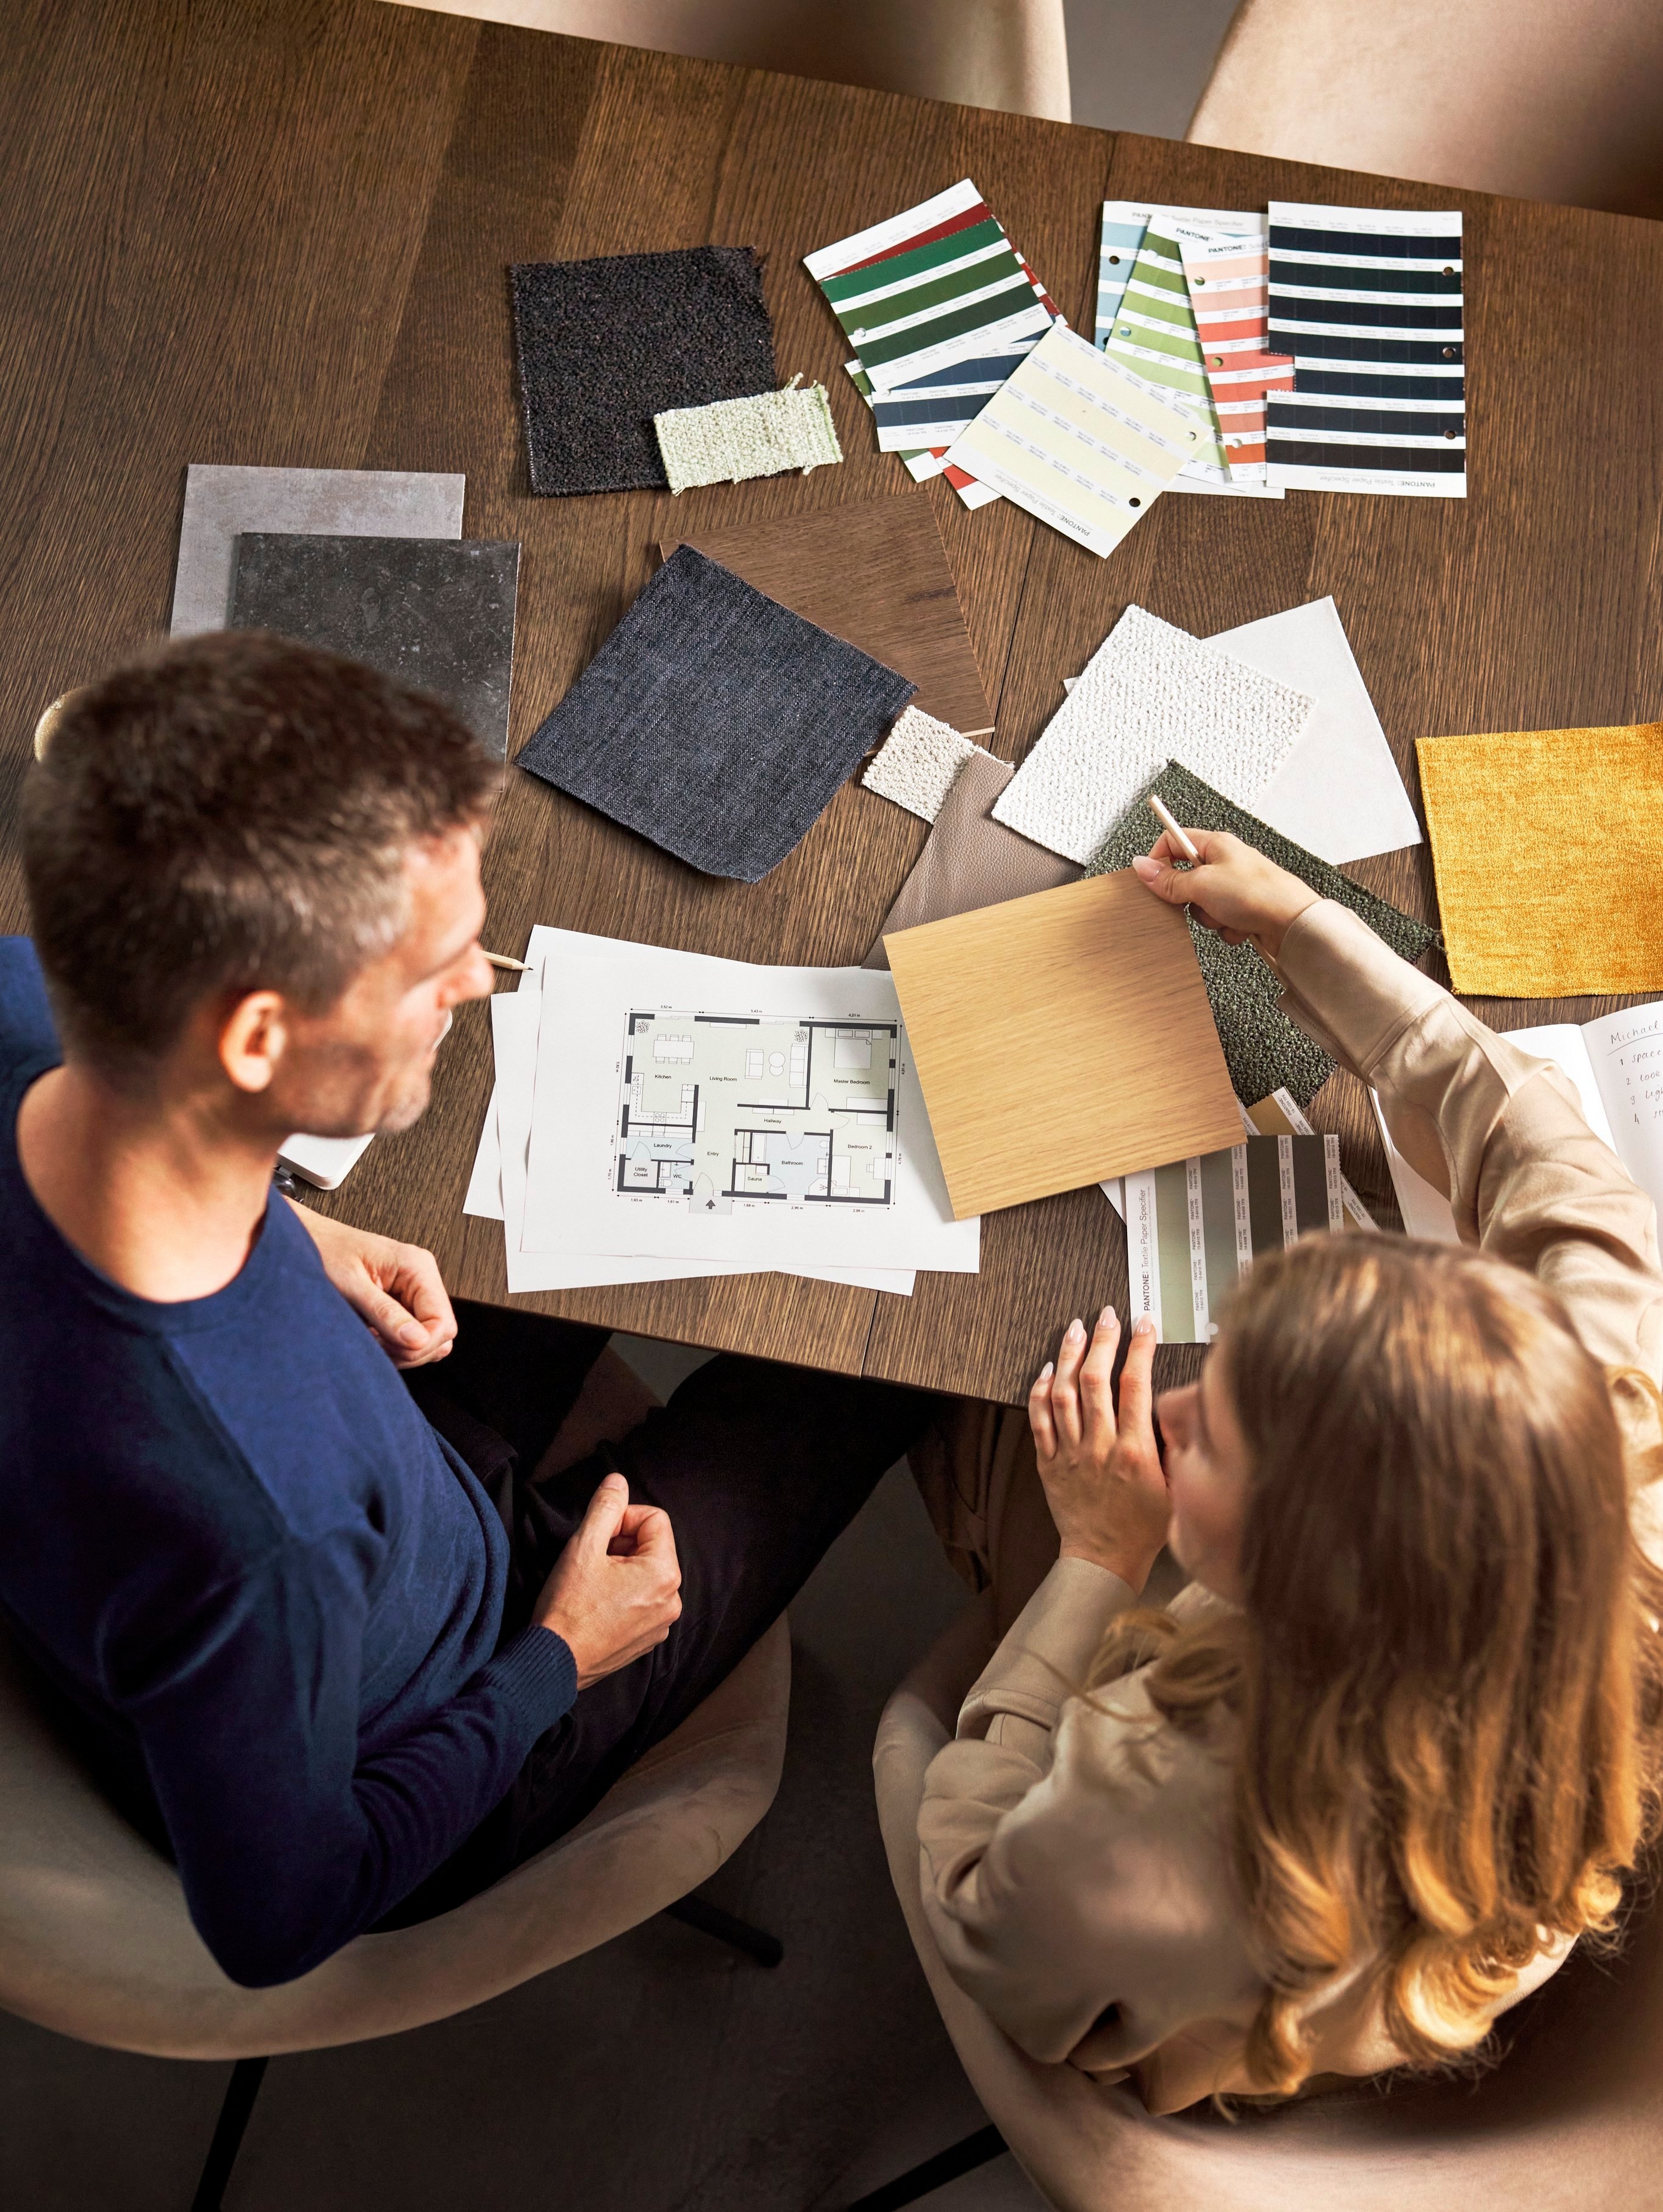 Overhead view of two people discussing material samples and floor plans at a table